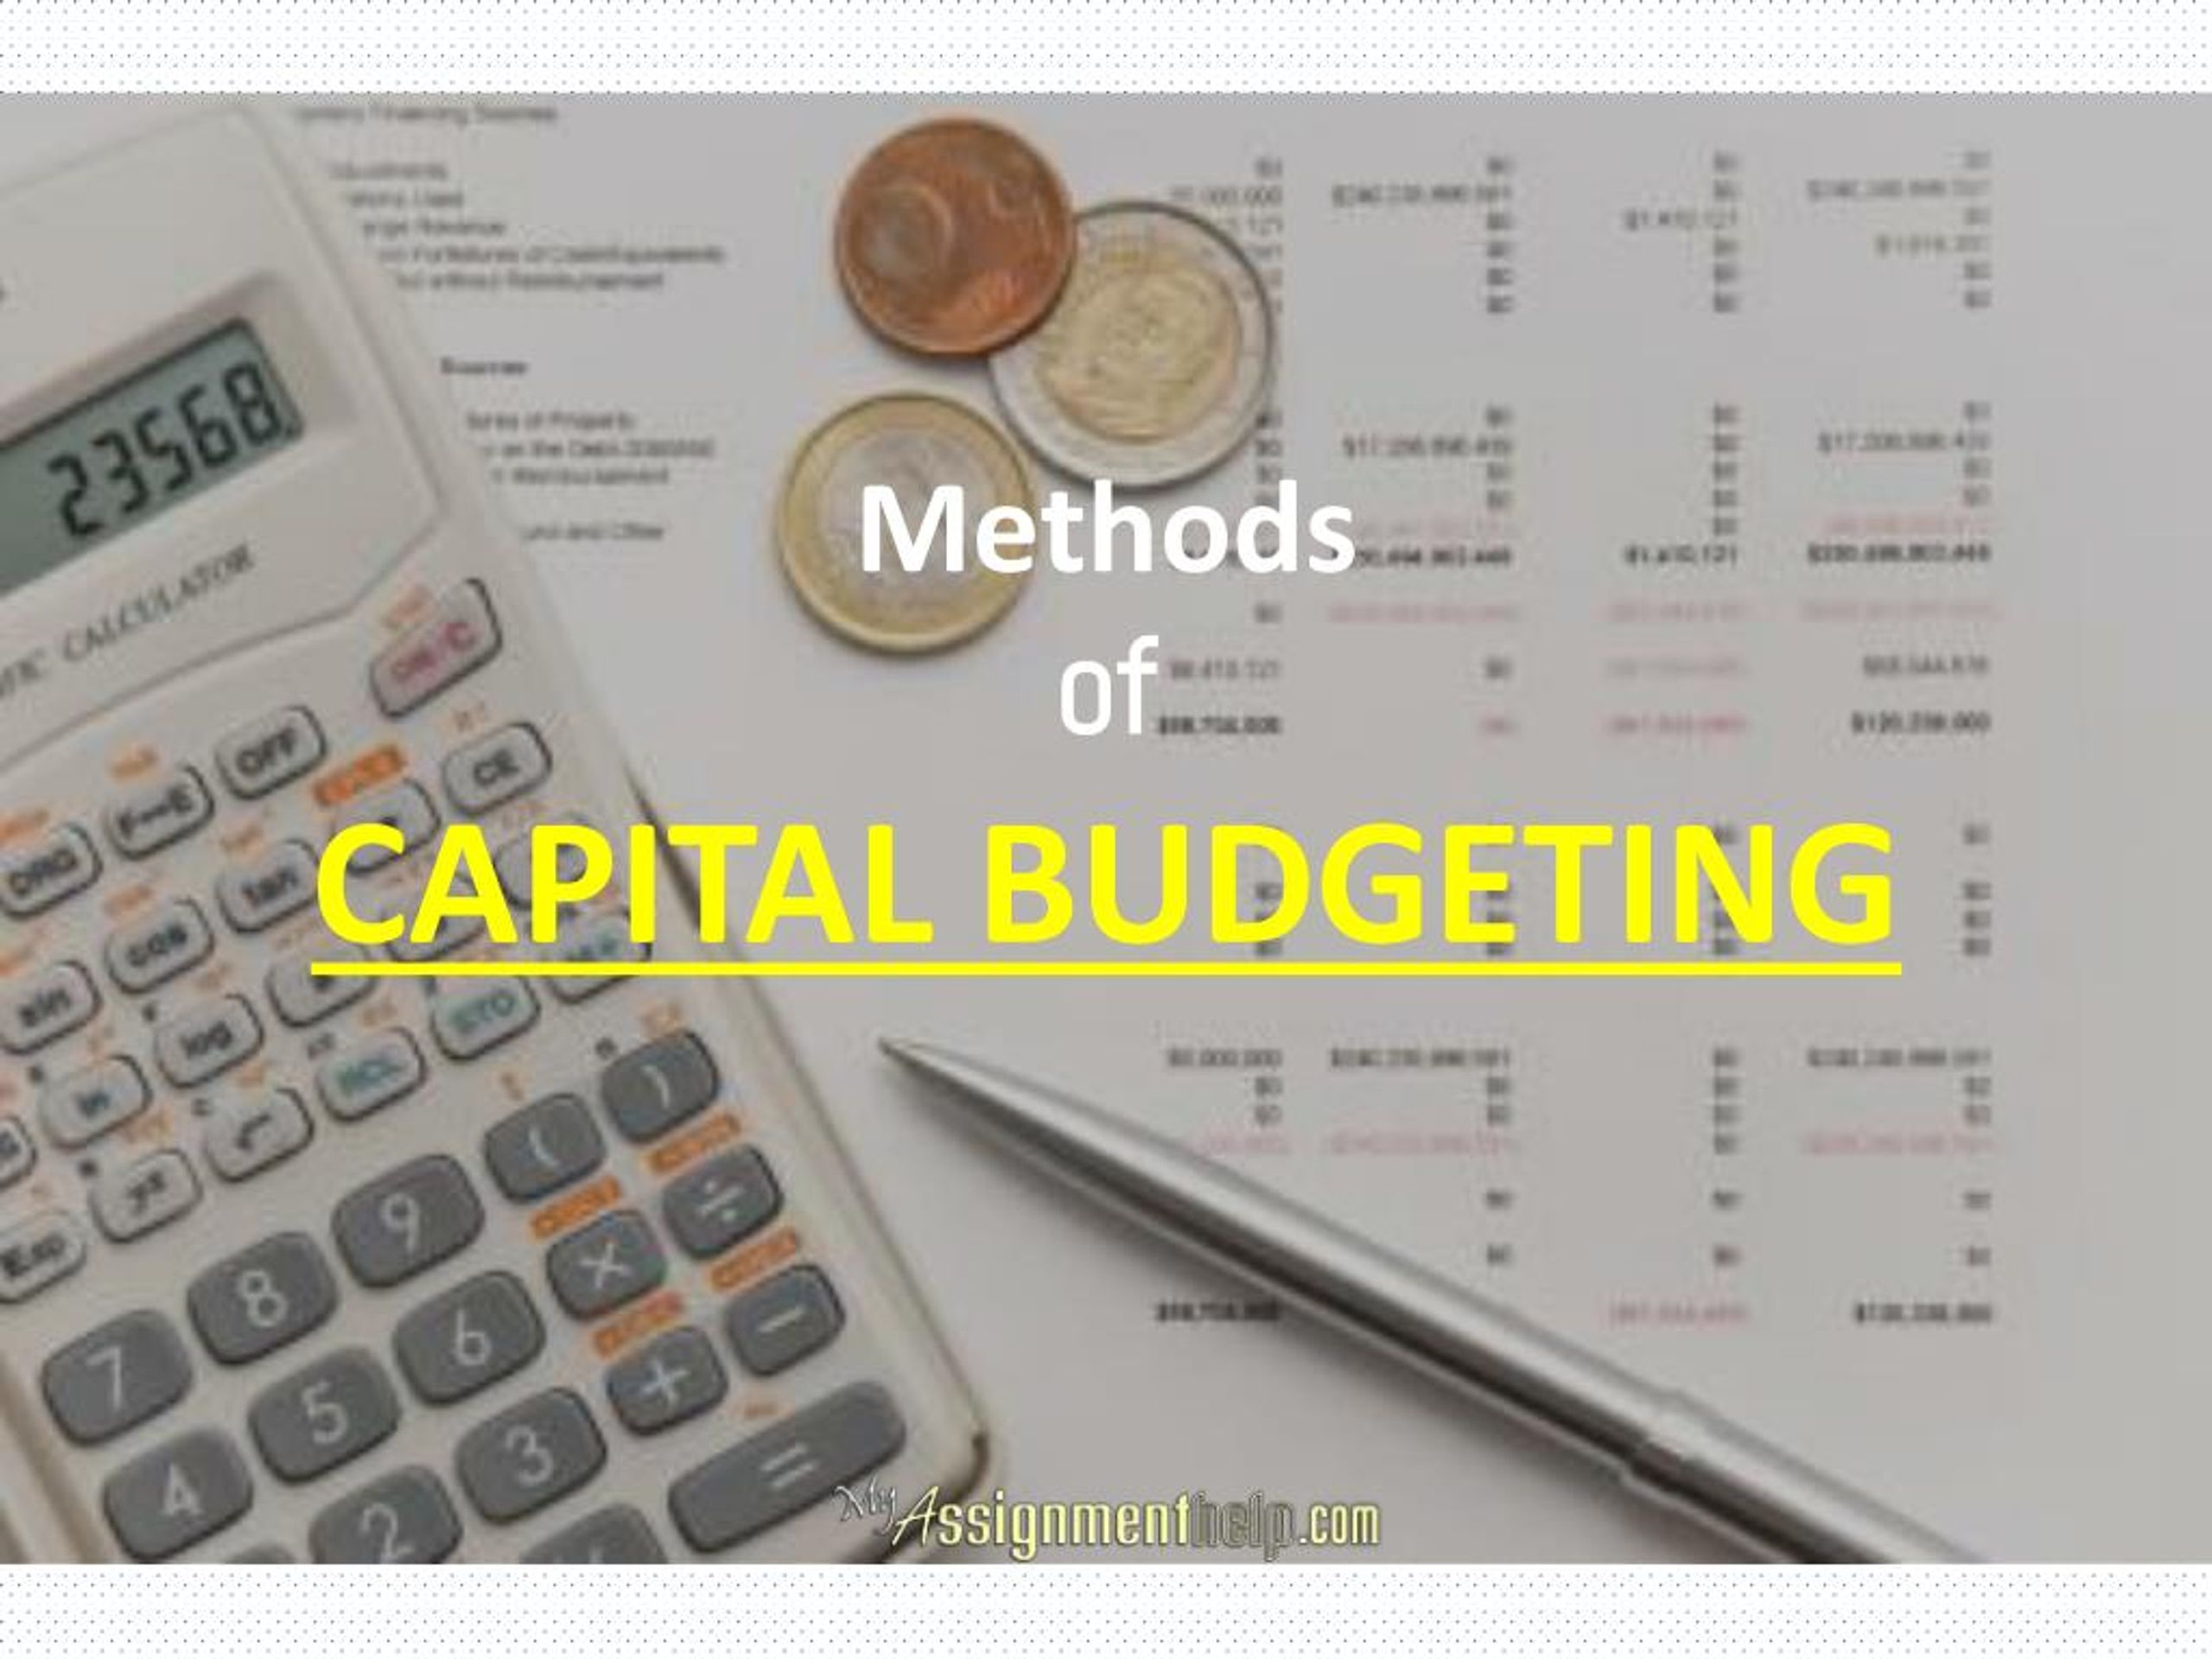 assignment on capital budgeting